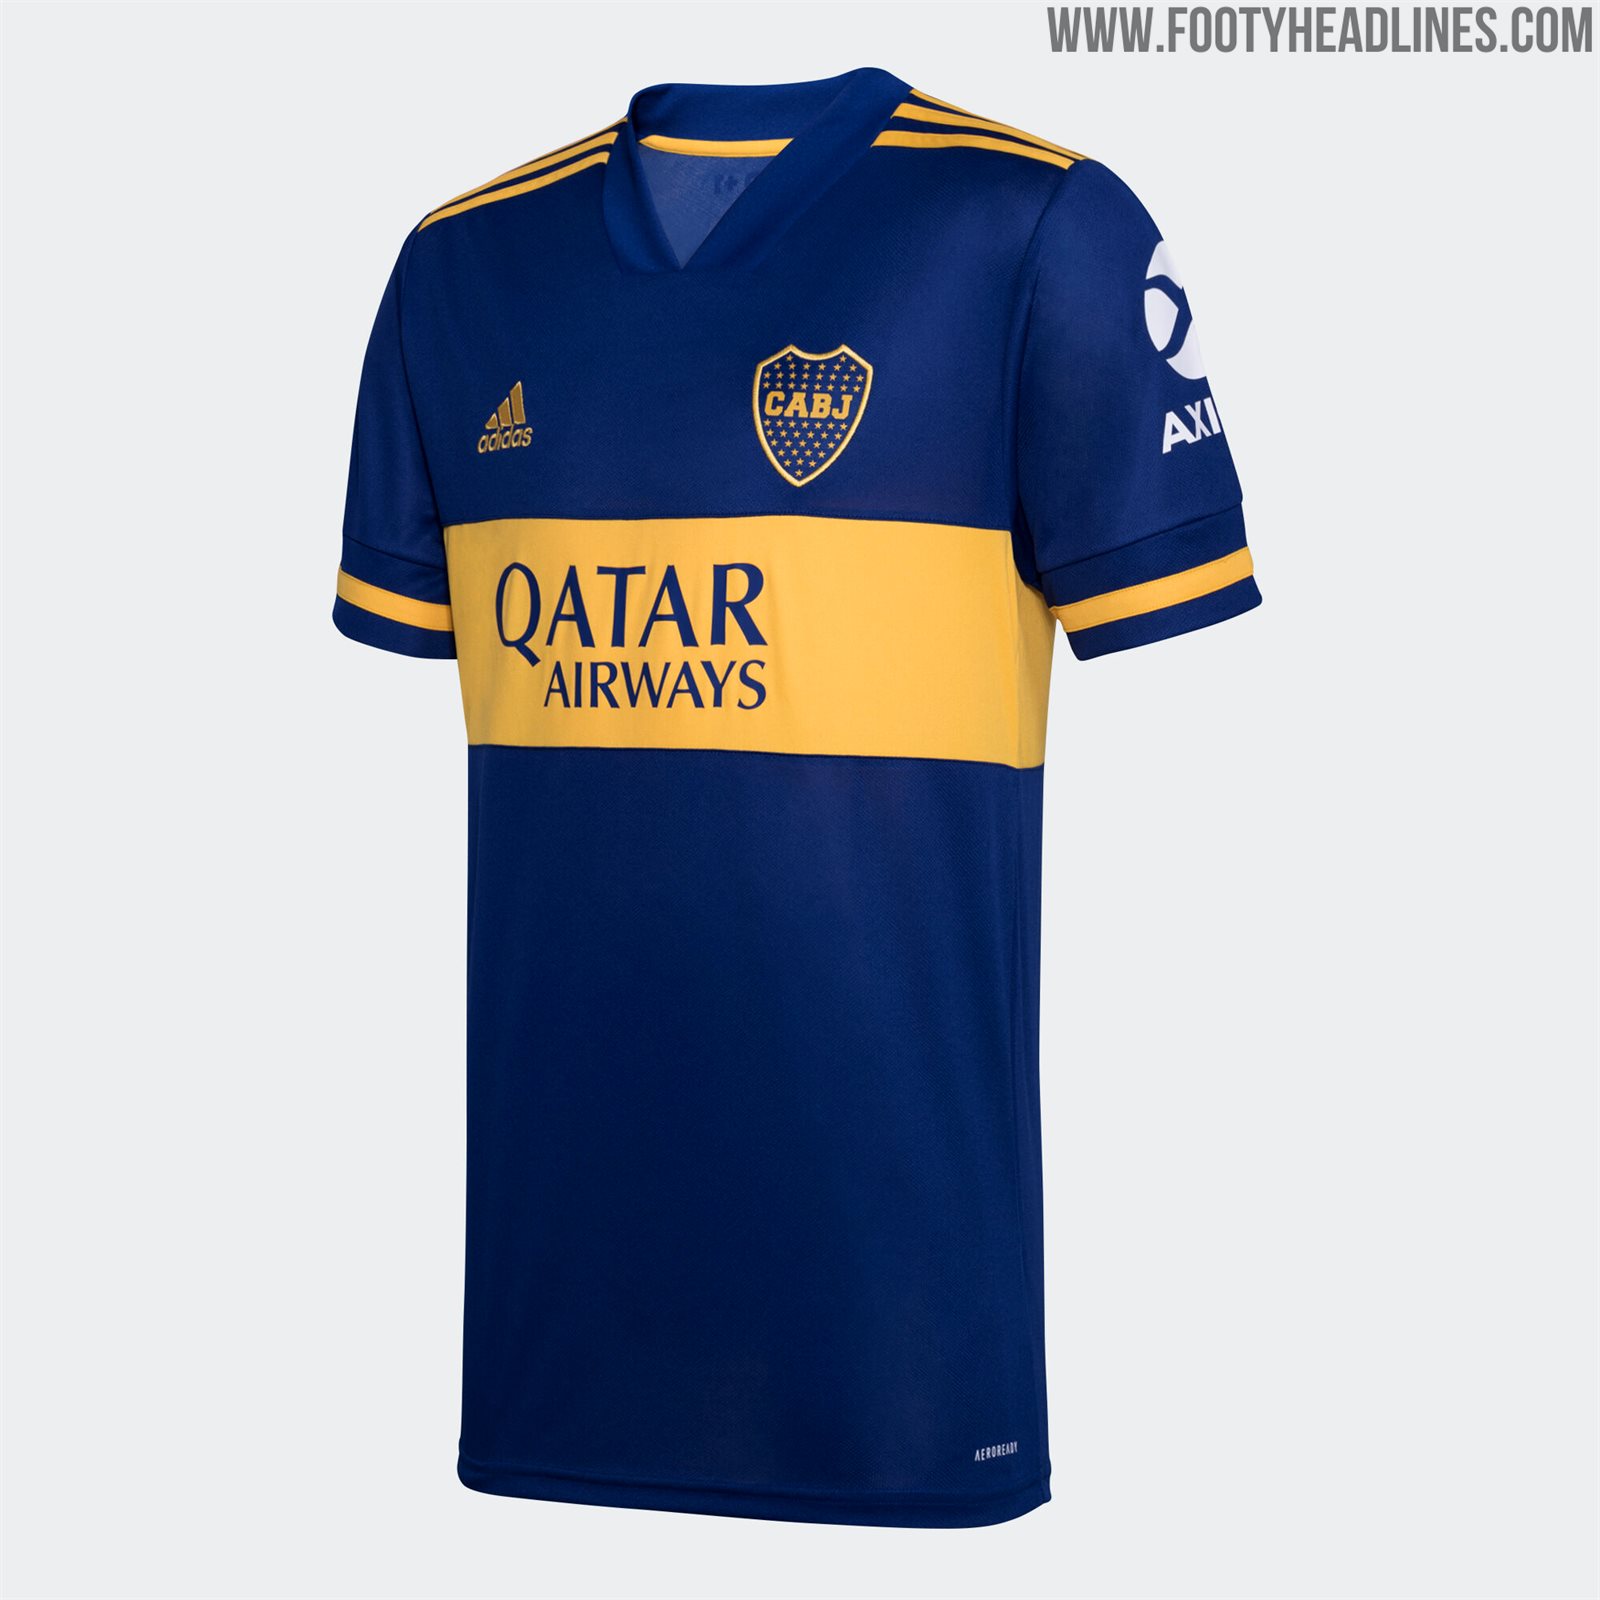 After 23 years with Nike, Boca Juniors unveil new Adidas kit - AS USA